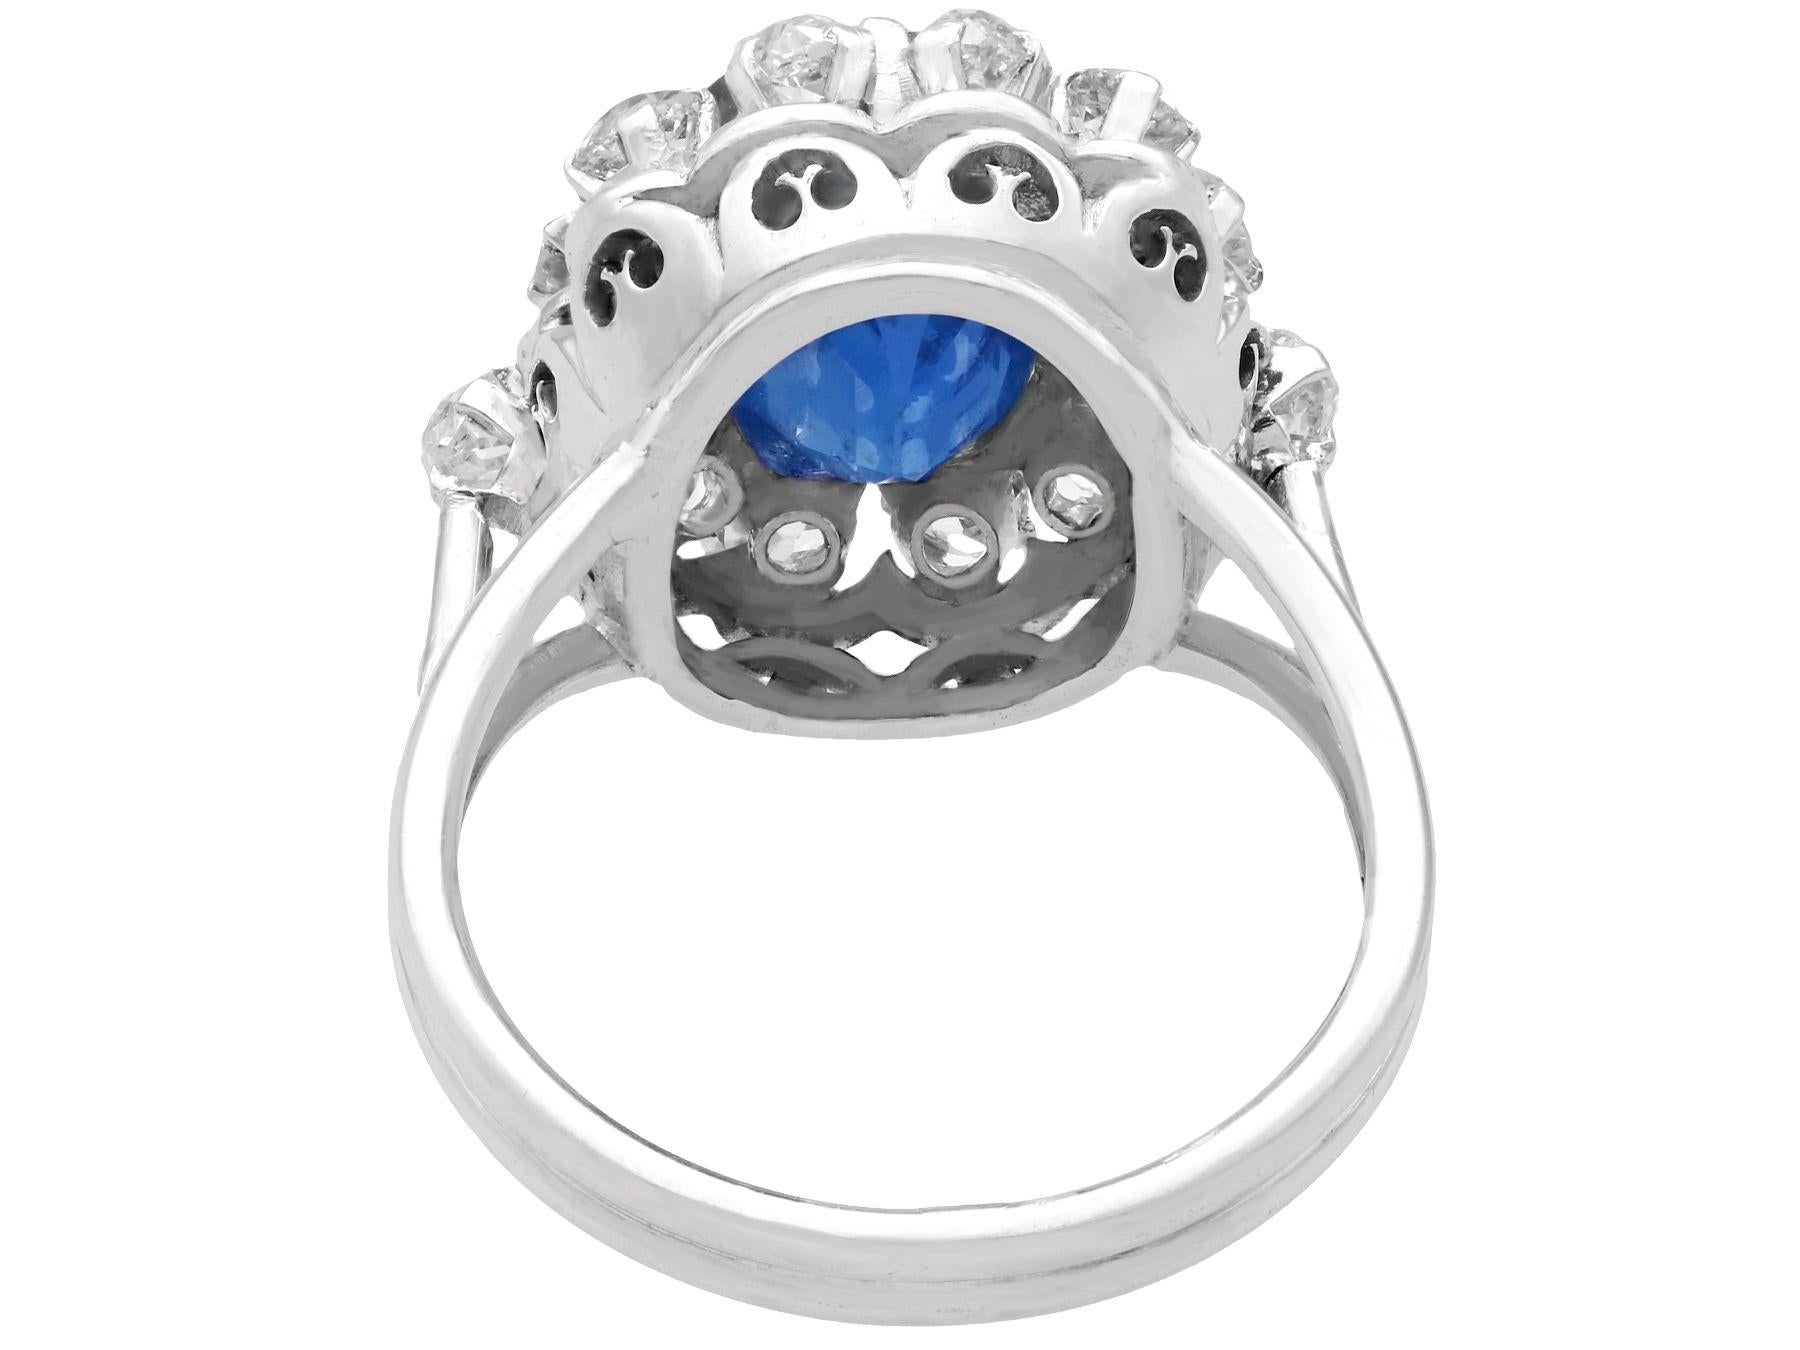 Vintage 1960s 6.53 Carat Sapphire and Diamond 18k White Gold Cocktail Ring In Excellent Condition For Sale In Jesmond, Newcastle Upon Tyne